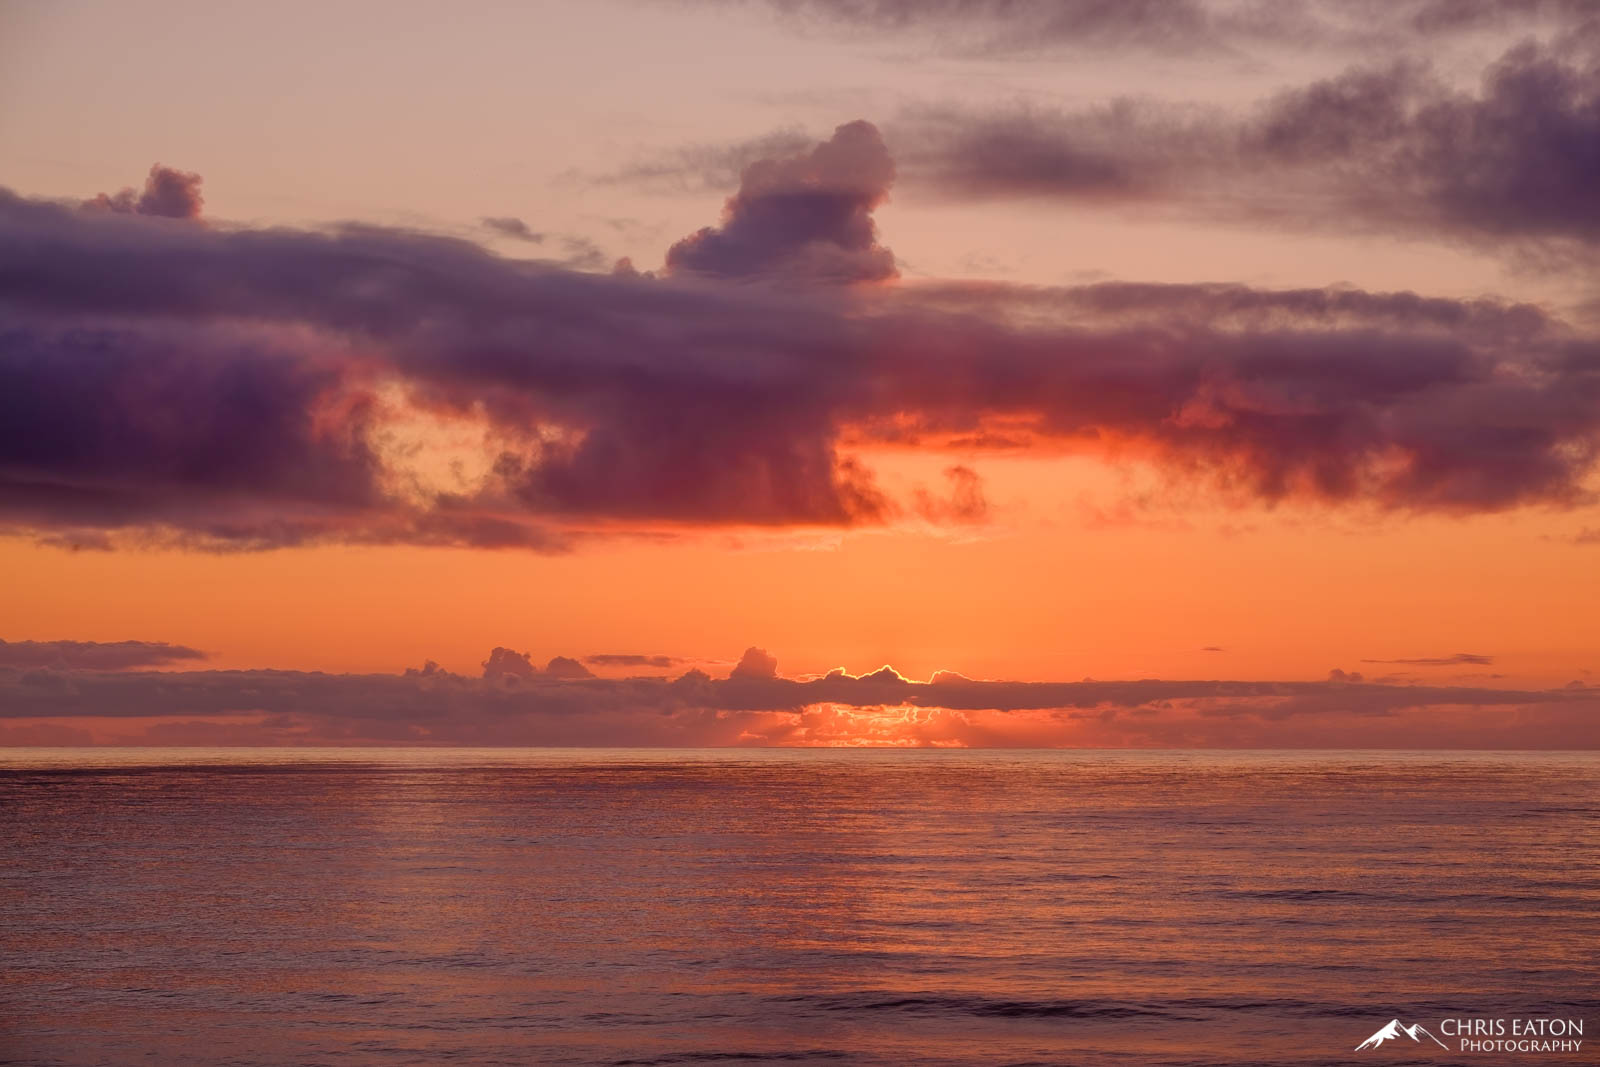 The sun sets on the Pacific Ocean at Heceta Head, painting the sky and the water in soft, yet fiery colors.